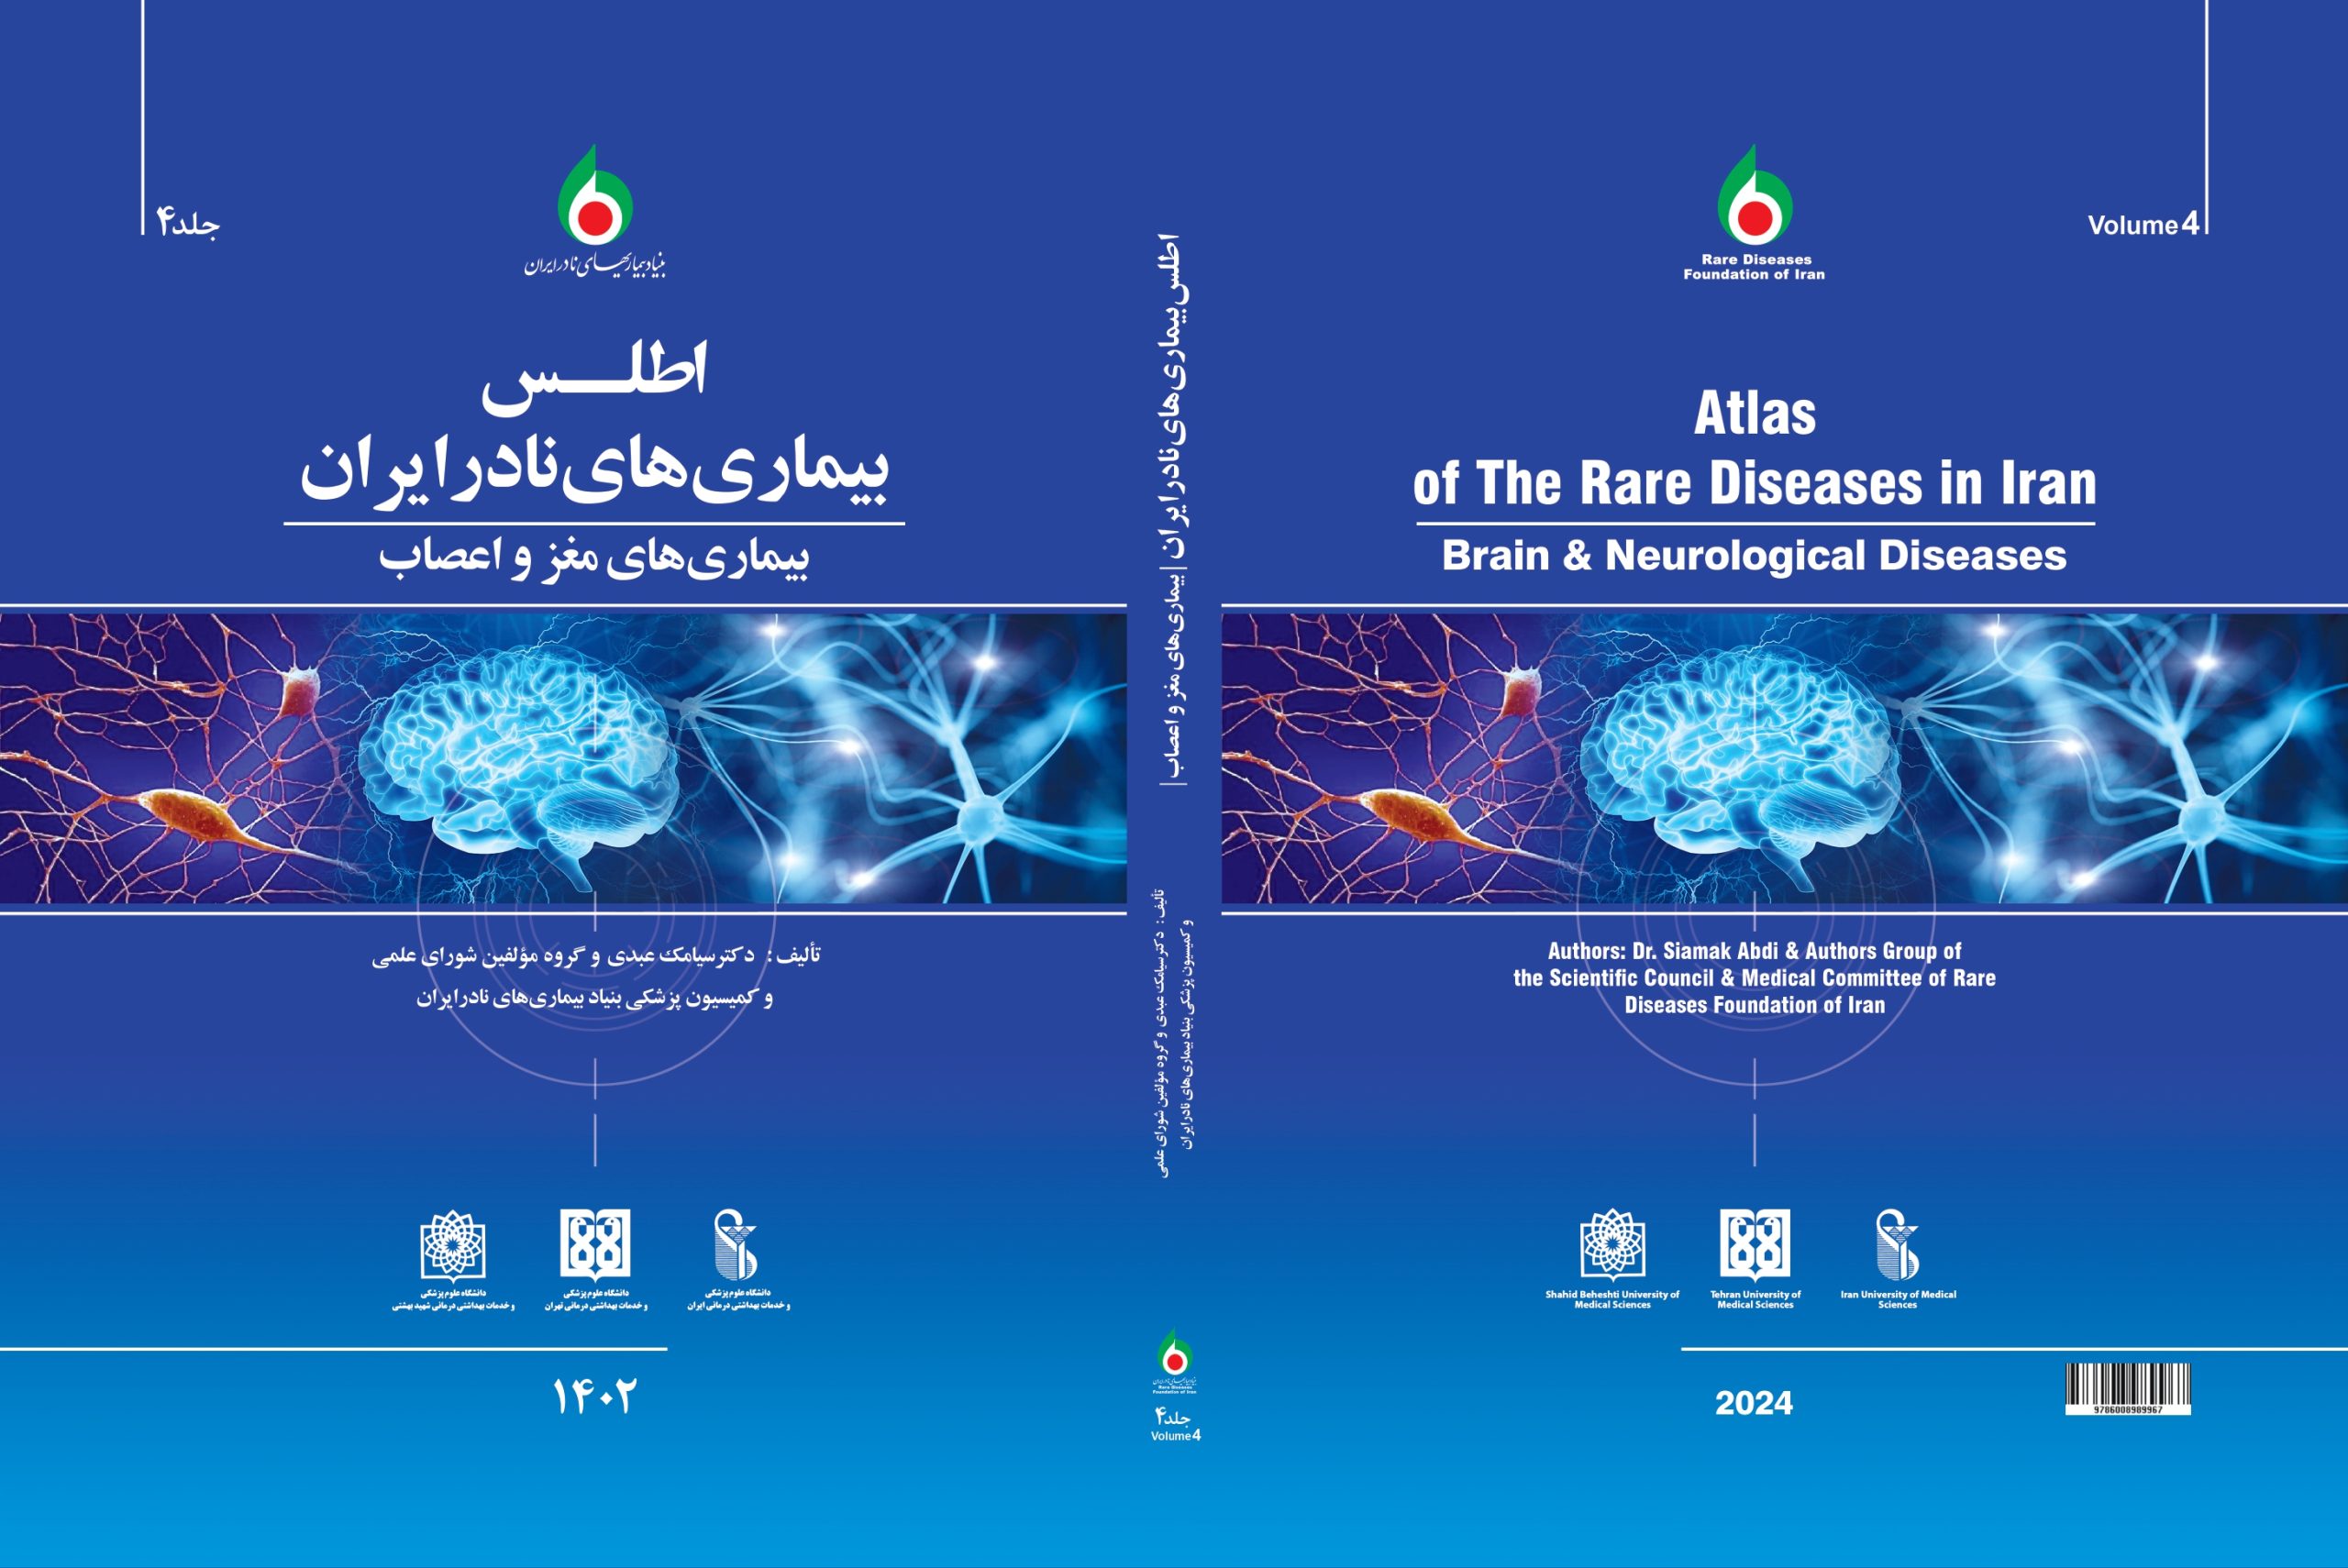 The 4TH volume of the Atlas of rare diseases of Iran has been published